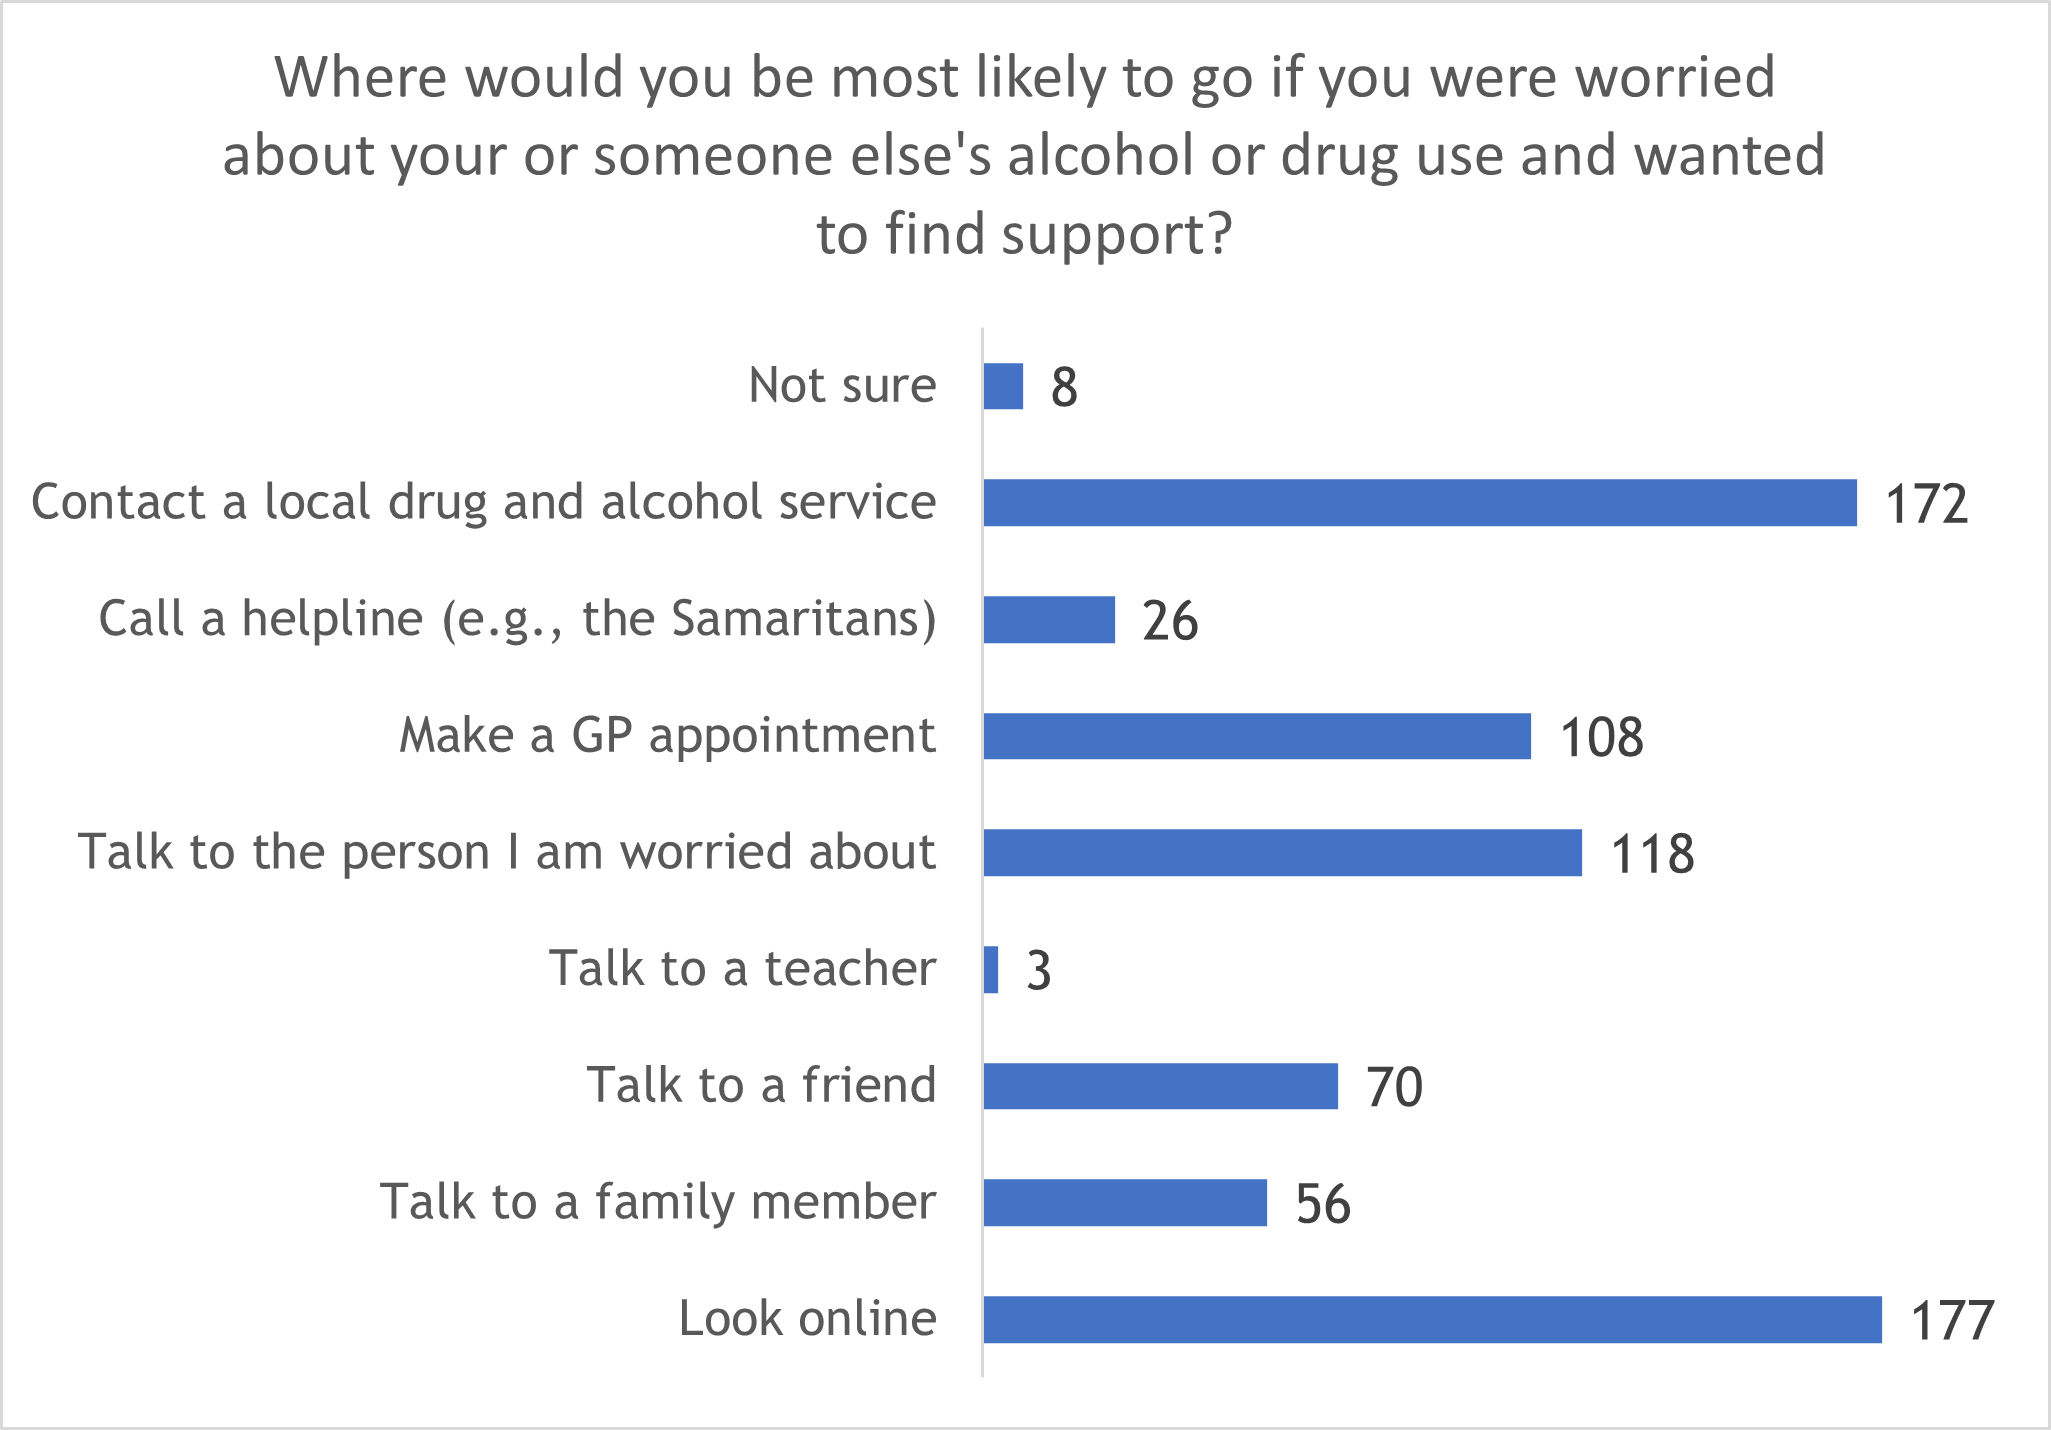 Chart to show where respondents would be most likely to go if they were worried about their own or someone else's alcohol or drug use and wanted to find support.  Look online, 177. Talk to a family member, 56.  Talk to a friend, 70. Talk to a teacher, 3. Talk to the person I am worried about, 118. Make a GP appointment, 108. Call a helpline (e.g., the Samaritans), 26. Contact a local drug and alcohol service, 172.  Not sure, 8.